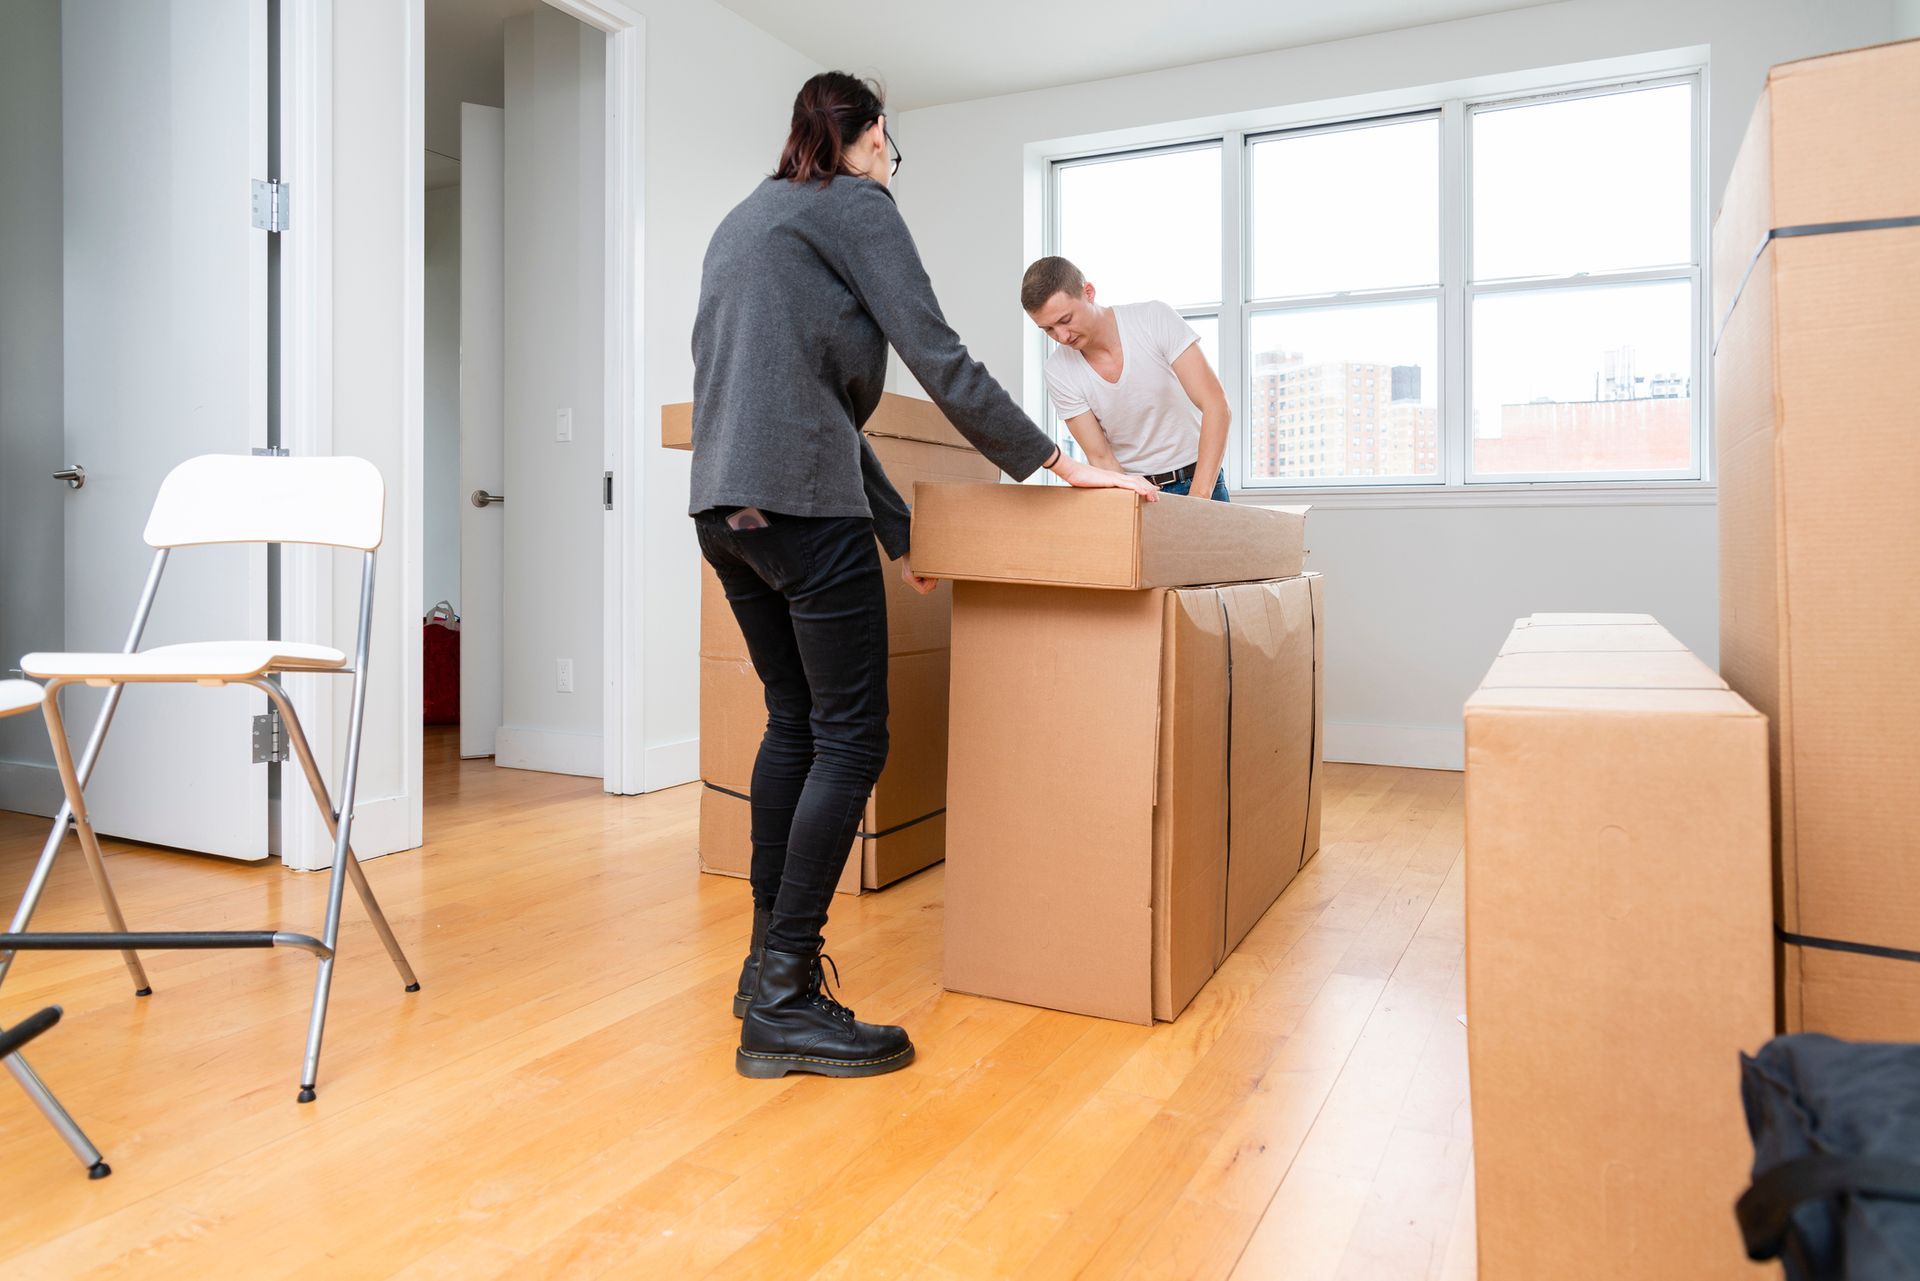 A Man And A Woman Are Packing Boxes In A Room | Clinton Township, MI | Touch of Class Cleaning